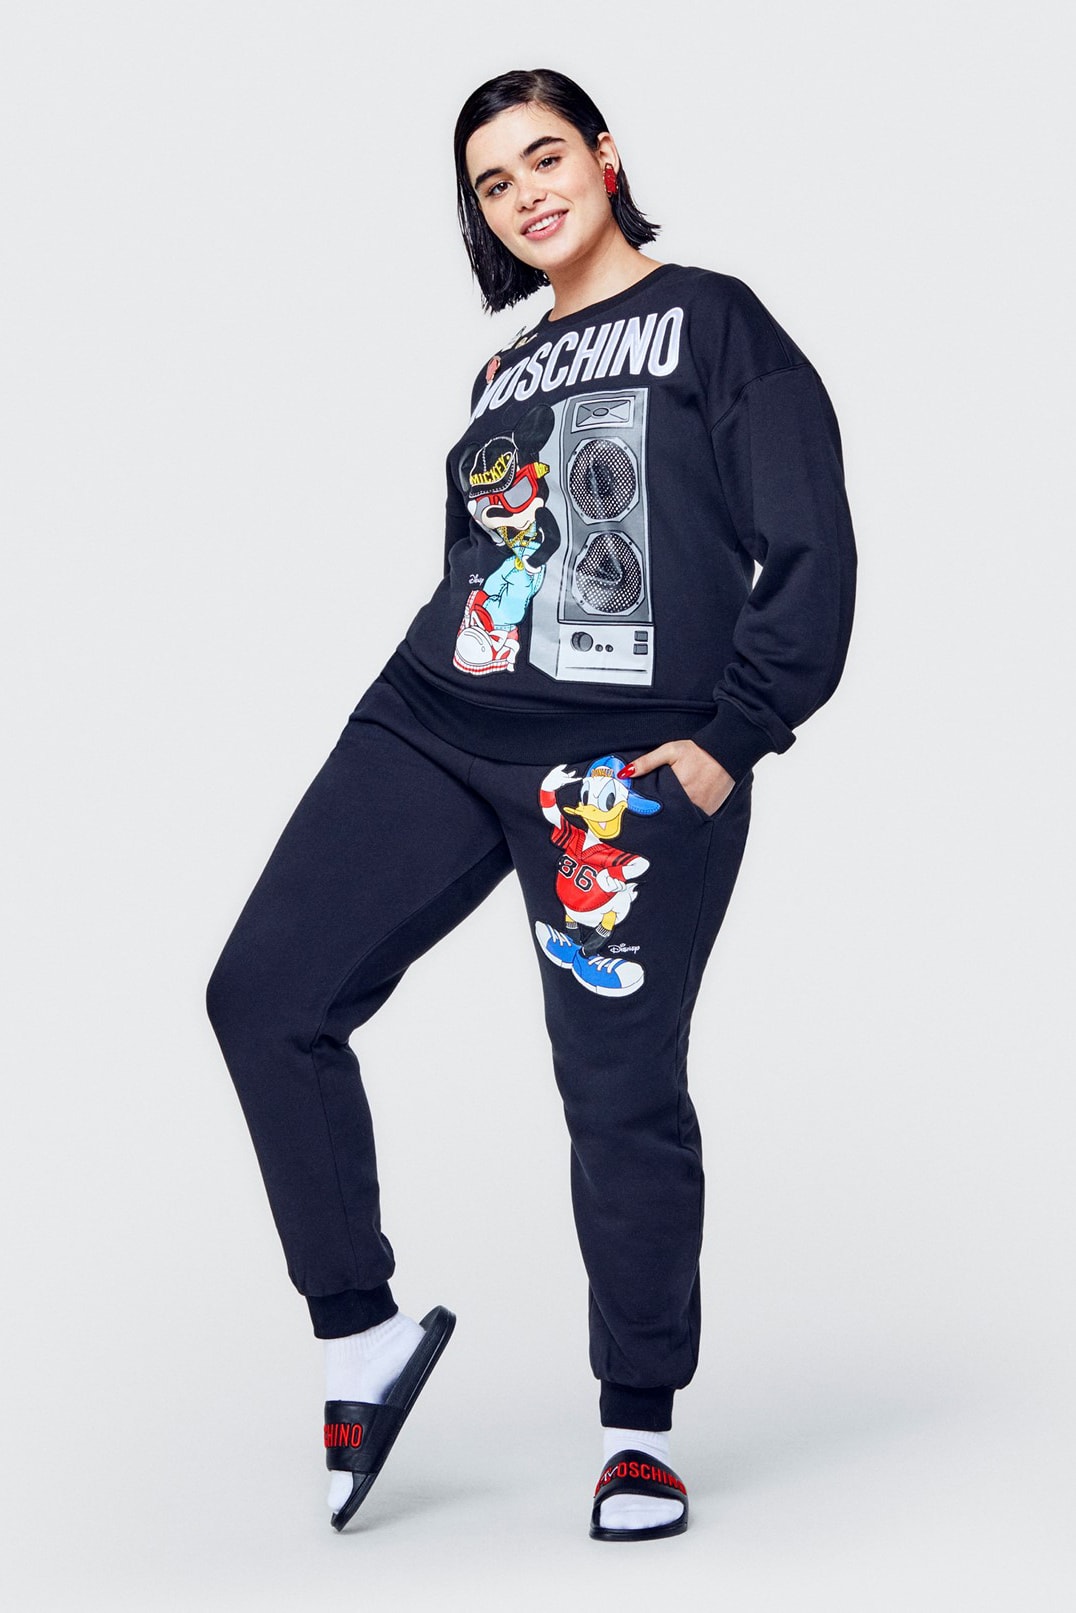 Moschino x H&M Reveal Collection Lookbook